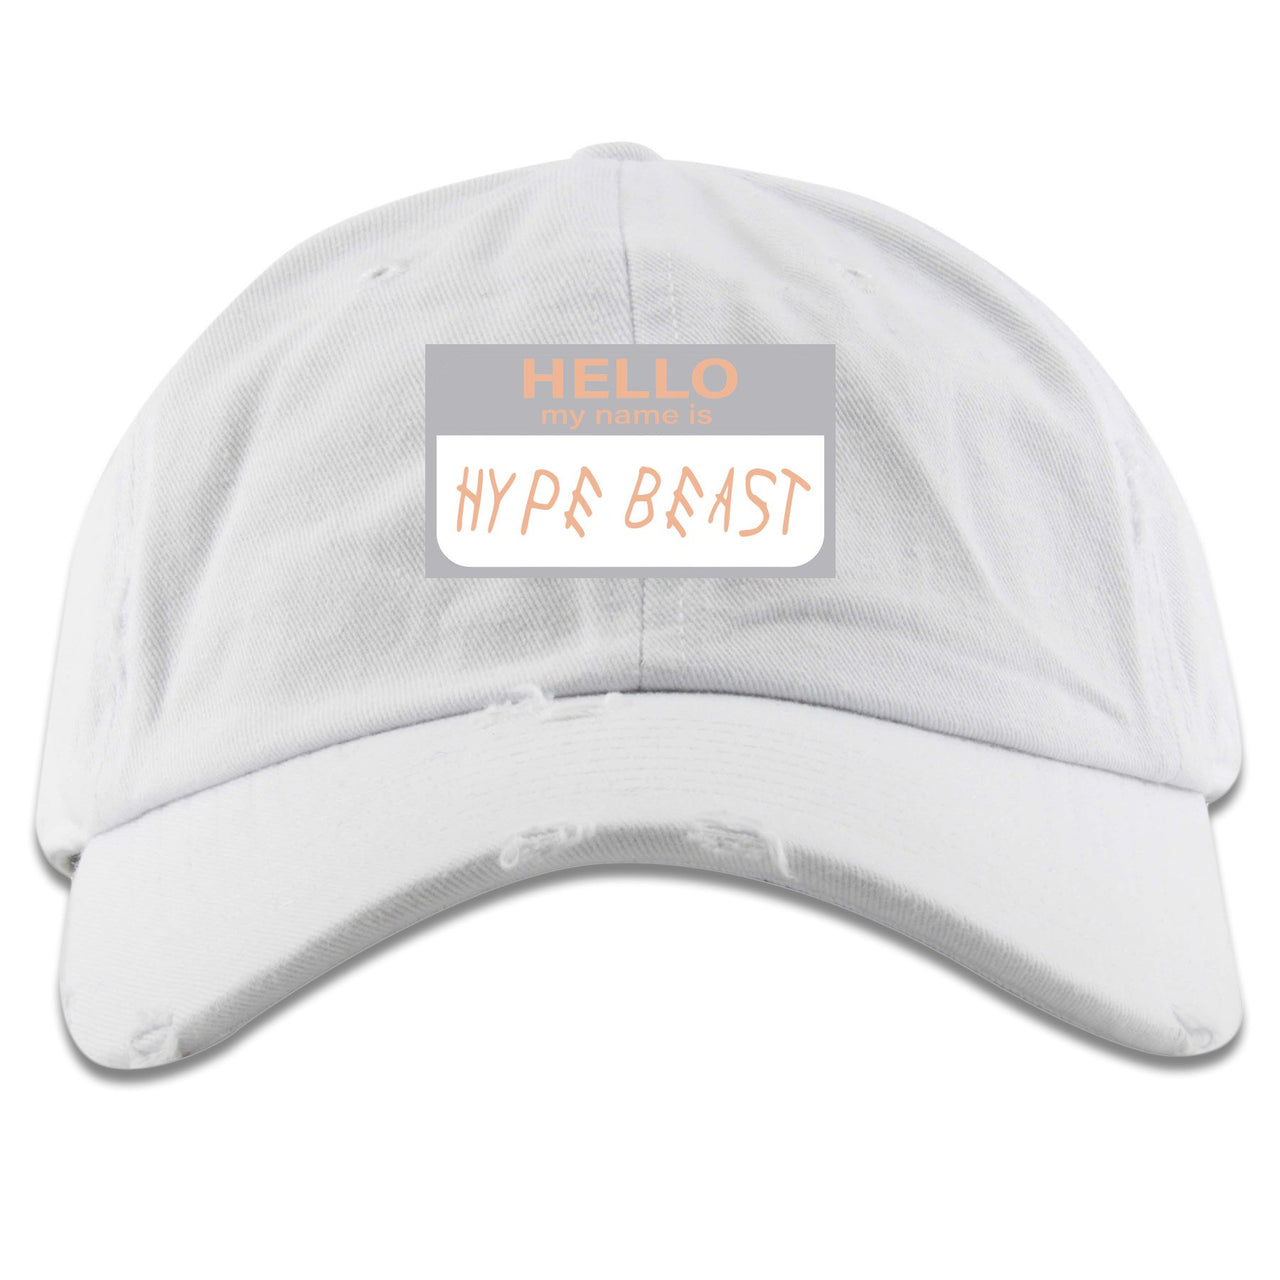 True Form v2 350s Distressed Dad Hat | Hello My Name Is Hype Beast Woe, White